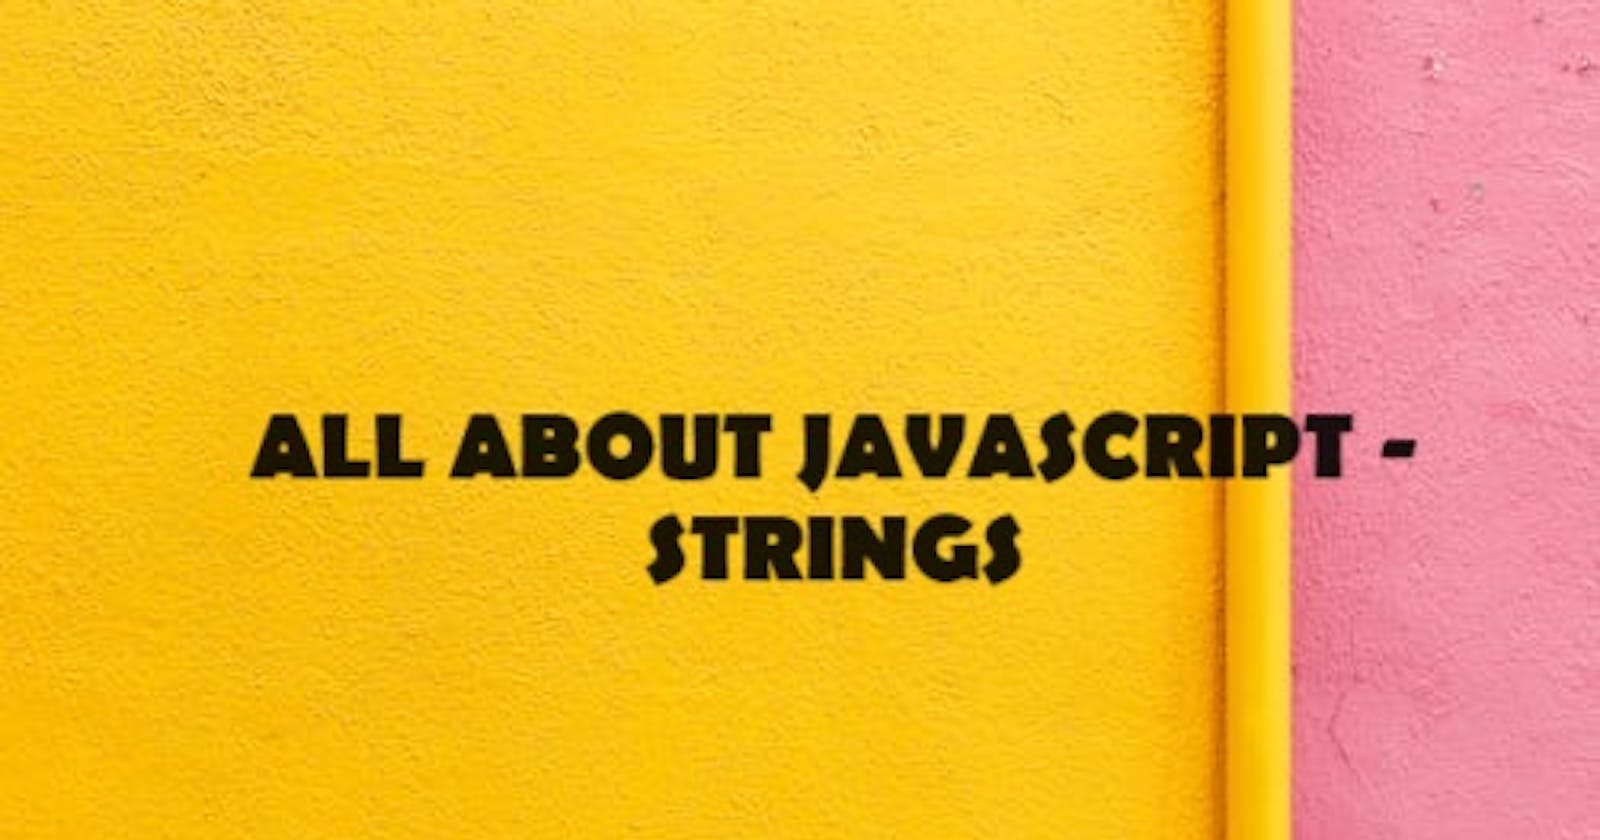 All about JavaScript  - String